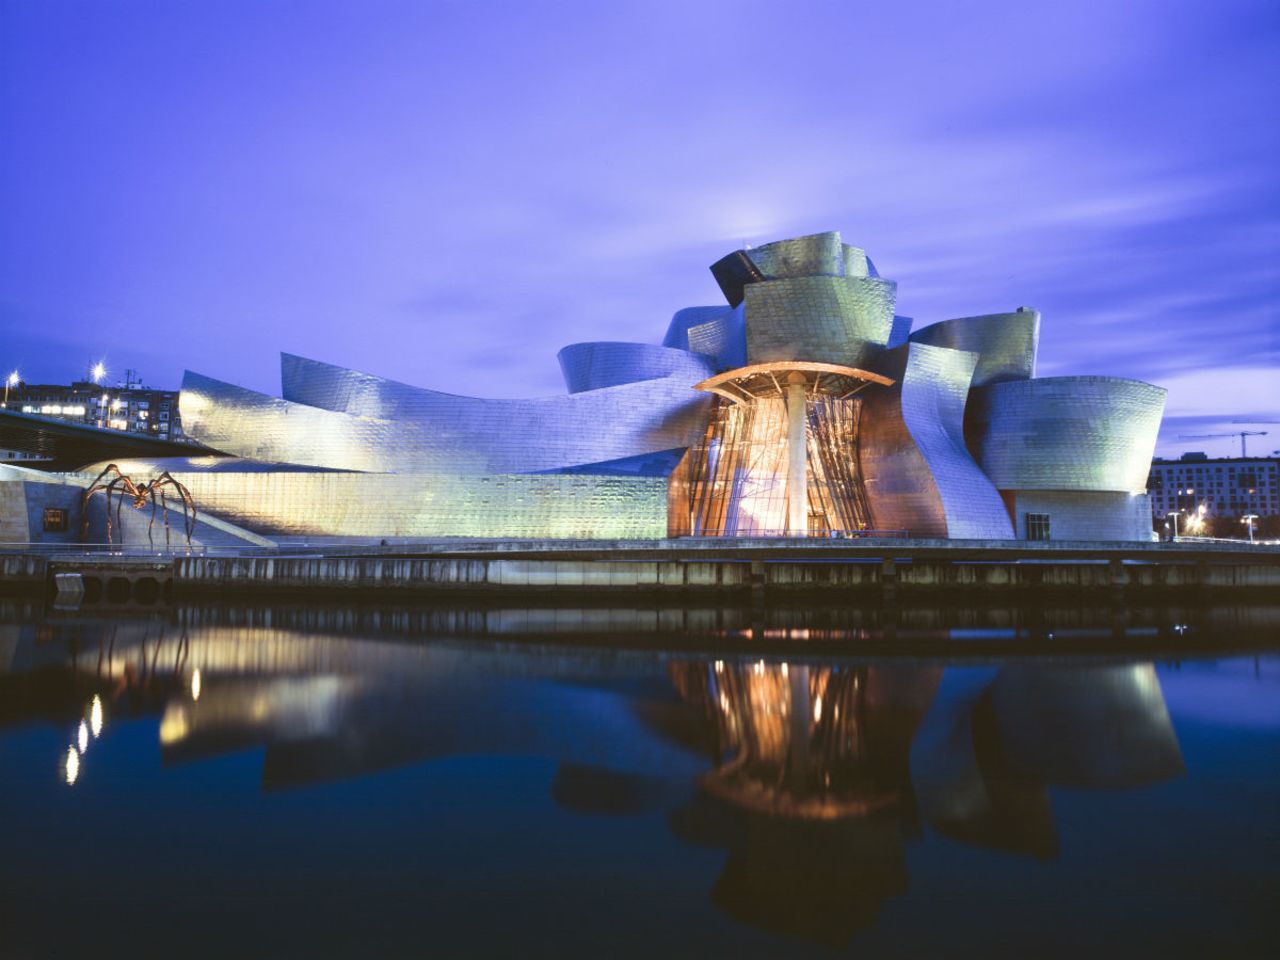 Inaugurated with great fanfare in 1997 -- King Juan Carlos I personally christened the building -- <a href="http://www.guggenheim-bilbao.es/" target="_blank" target="_blank">Bilbao's Guggenheim Museum</a> continues to charm visitors from around the world. Given carte blanche to design something "innovative" by the museum's director, legendary architect Frank Gehry created a seamless-looking structure made of limestone, glass and titanium that dramatically captures the light when viewed from the adjacent Nervión River. <br /><br />The museum was featured in the James Bond film "The World is Not Enough," Mariah Carey's music video "Sweetheart" and in the computer game SimCity 4.